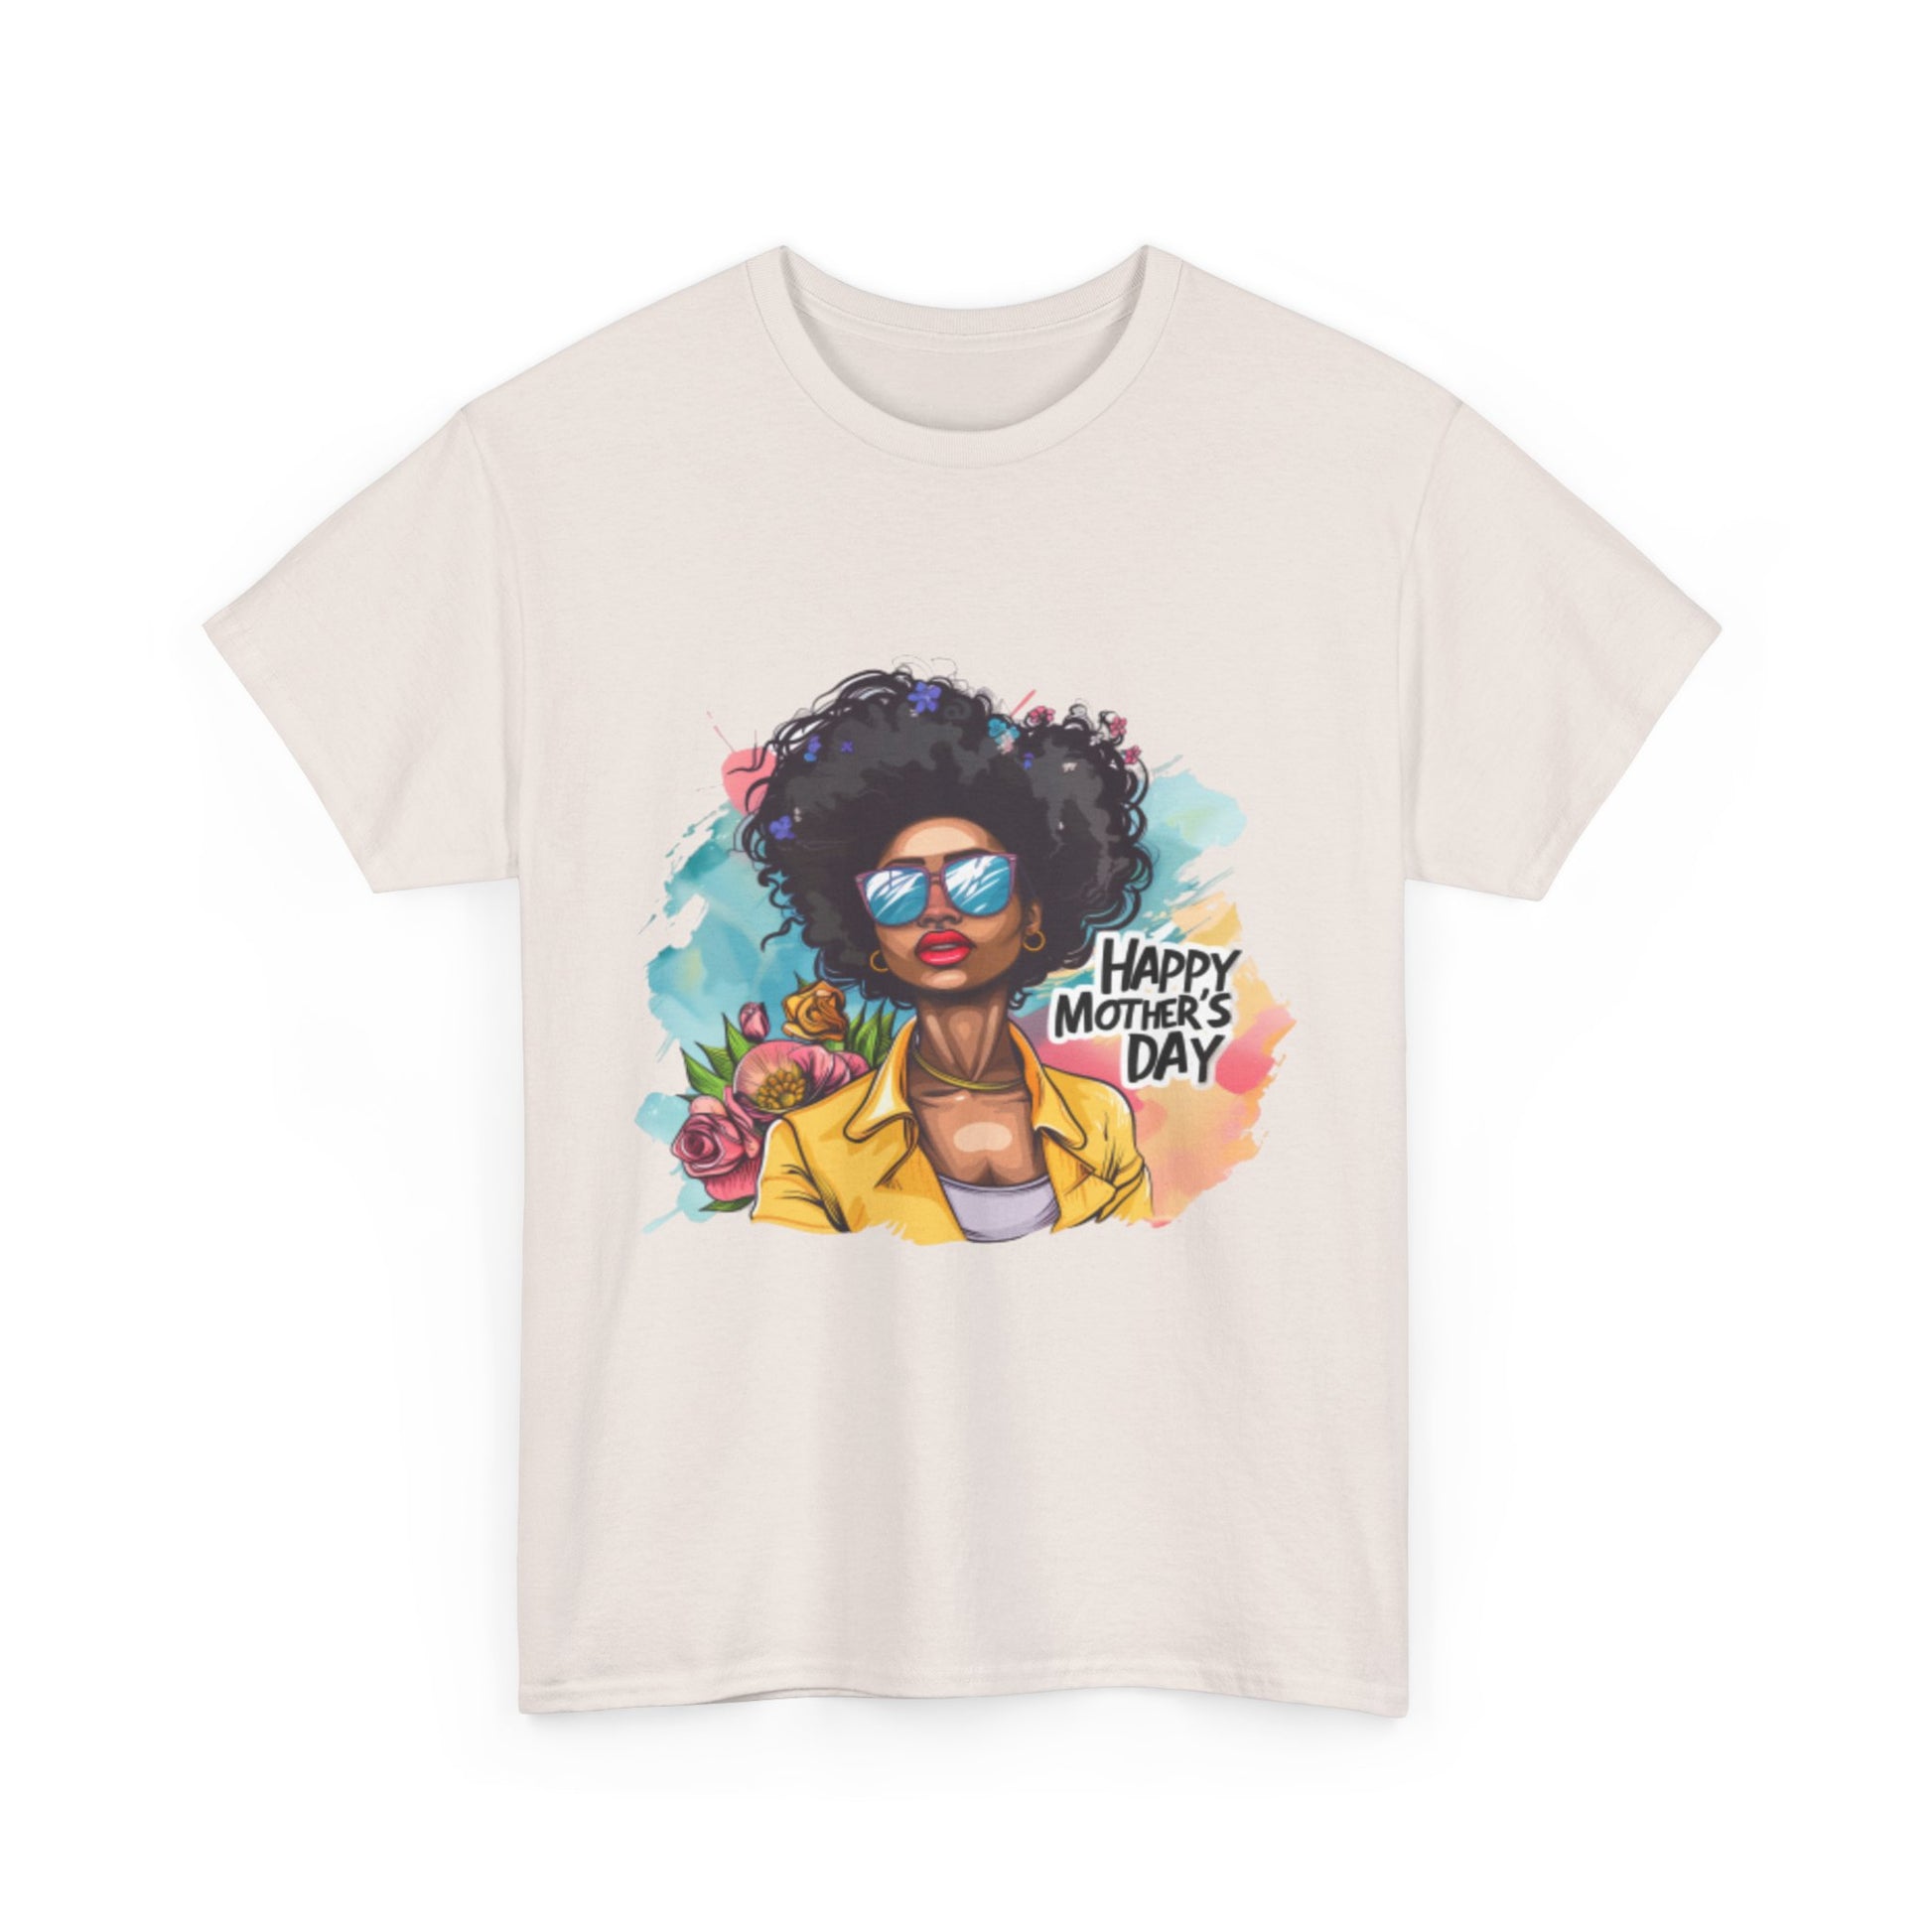 Happy Mother's Day African American Mom Graphic Unisex Heavy Cotton Tee Cotton Funny Humorous Graphic Soft Premium Unisex Men Women Ice Gray T-shirt Birthday Gift-48